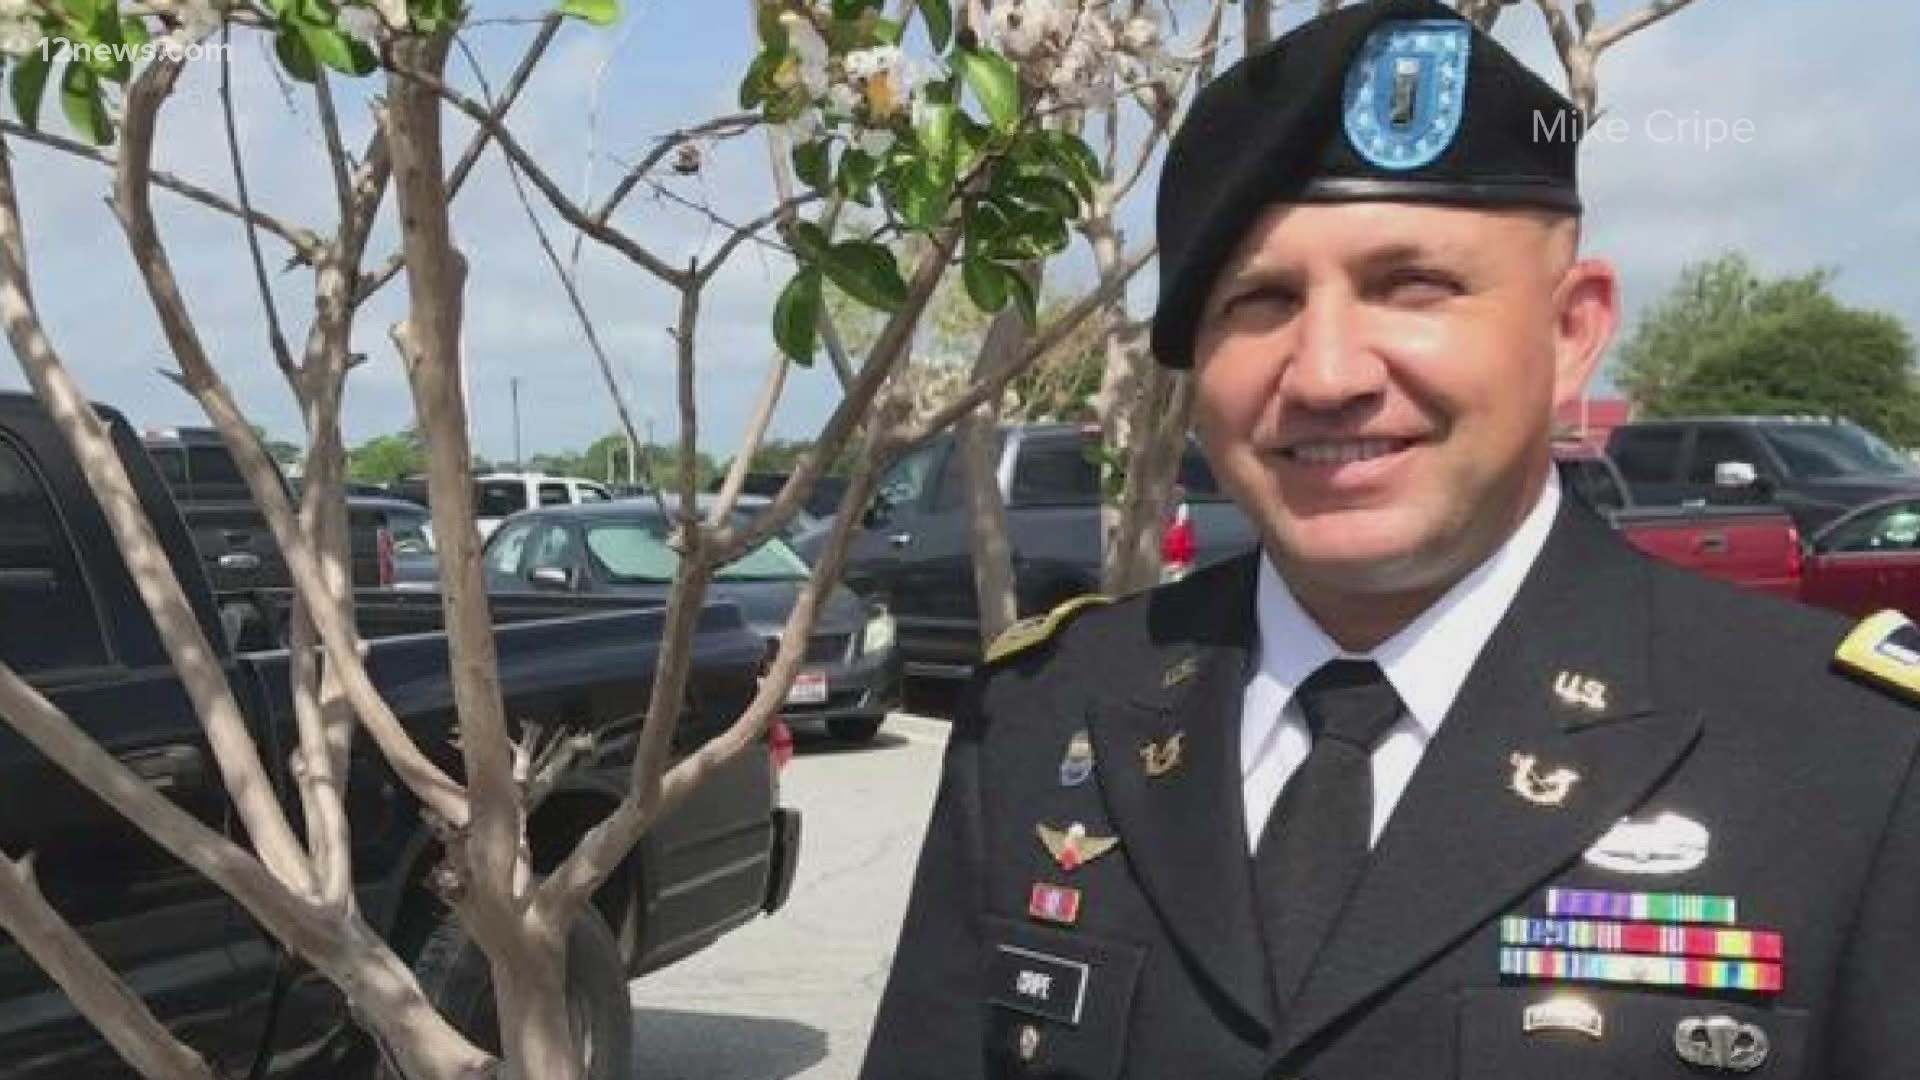 Michael Cripe is an Army veteran who comes from a family with a long history of serving our country. He's also helping other veterans transition to civilian life.